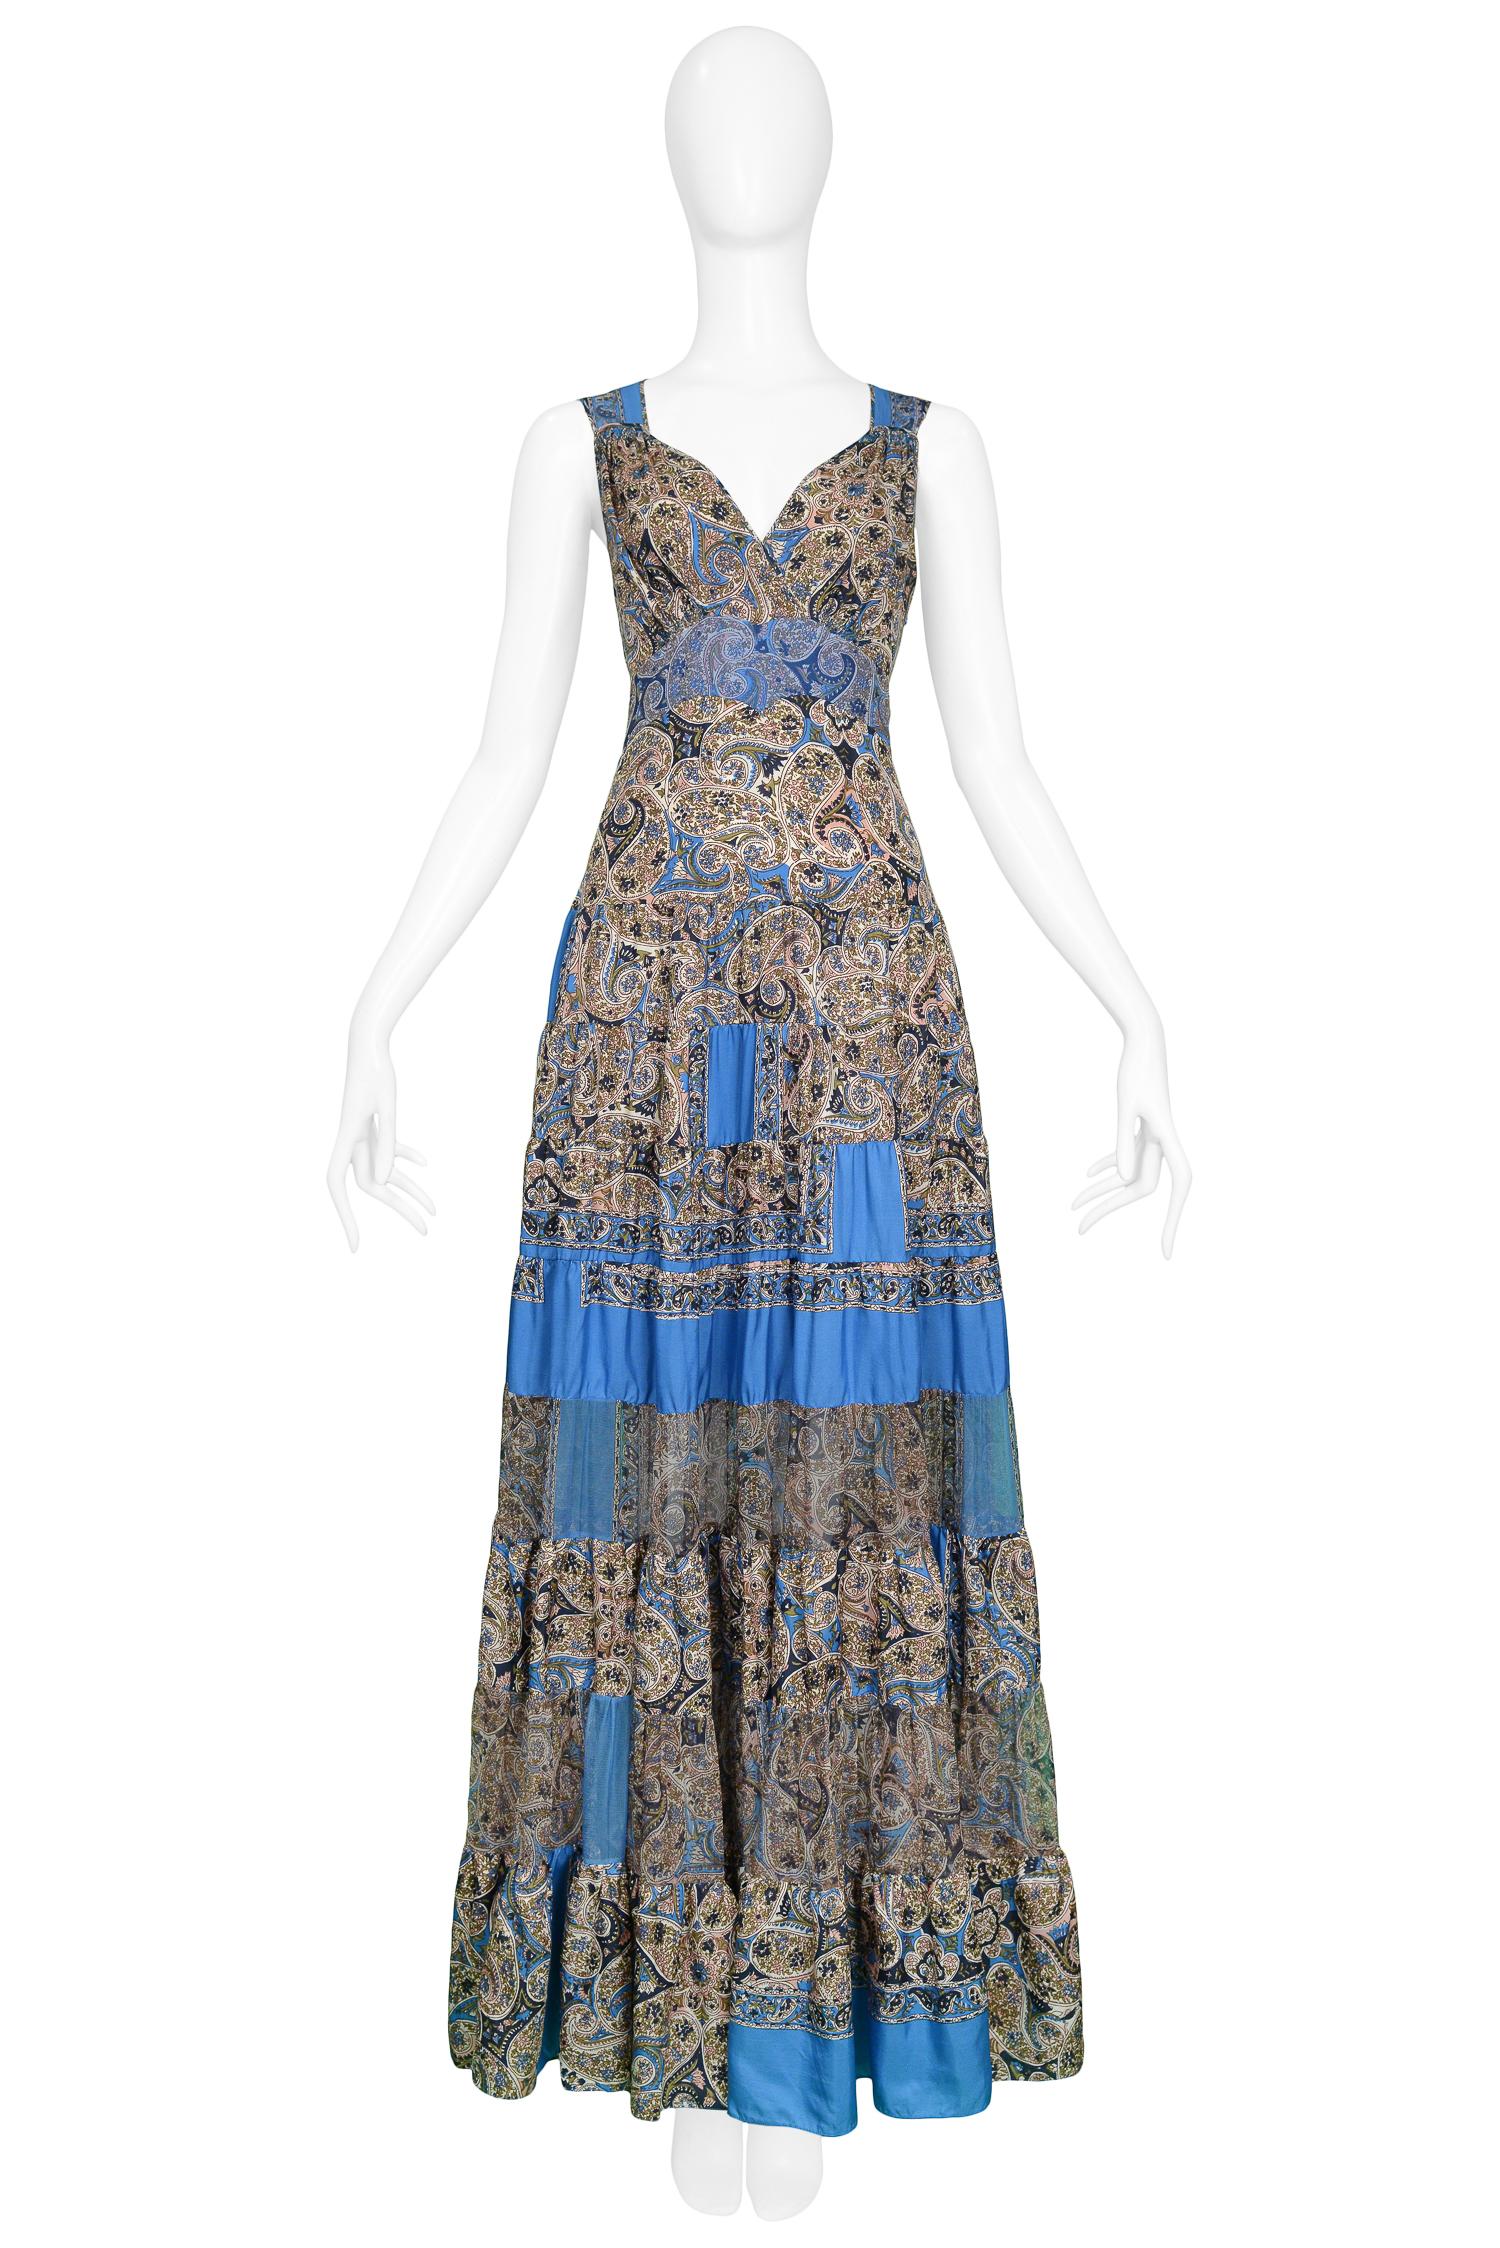 We are excited to offer a vintage Balenciaga by Nicolas Ghesquiere blue and paisley print bohemian maxi dress featuring patchwork panels, some sheer panels, a long full skirt, exposed neckline, and an attached sash that ties in the back. The dress